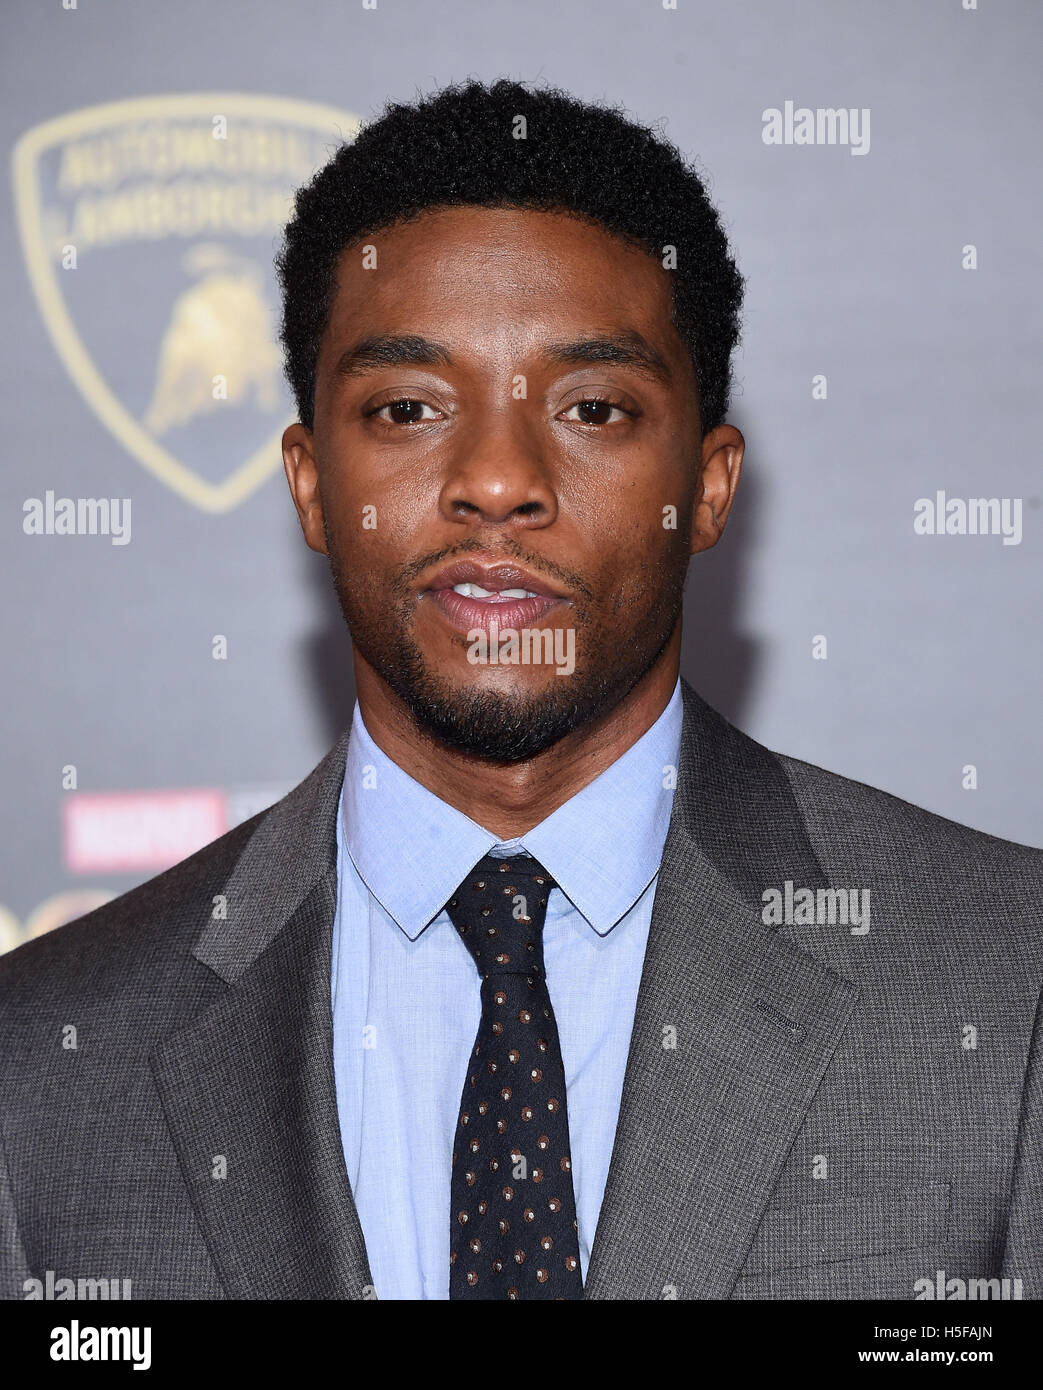 Hollywood, California, USA. 20th Oct, 2016. Chadwick Boseman arrives for the premiere of the film 'Doctor Strange' at the El Capitan theater. Credit:  Lisa O'Connor/ZUMA Wire/Alamy Live News Stock Photo